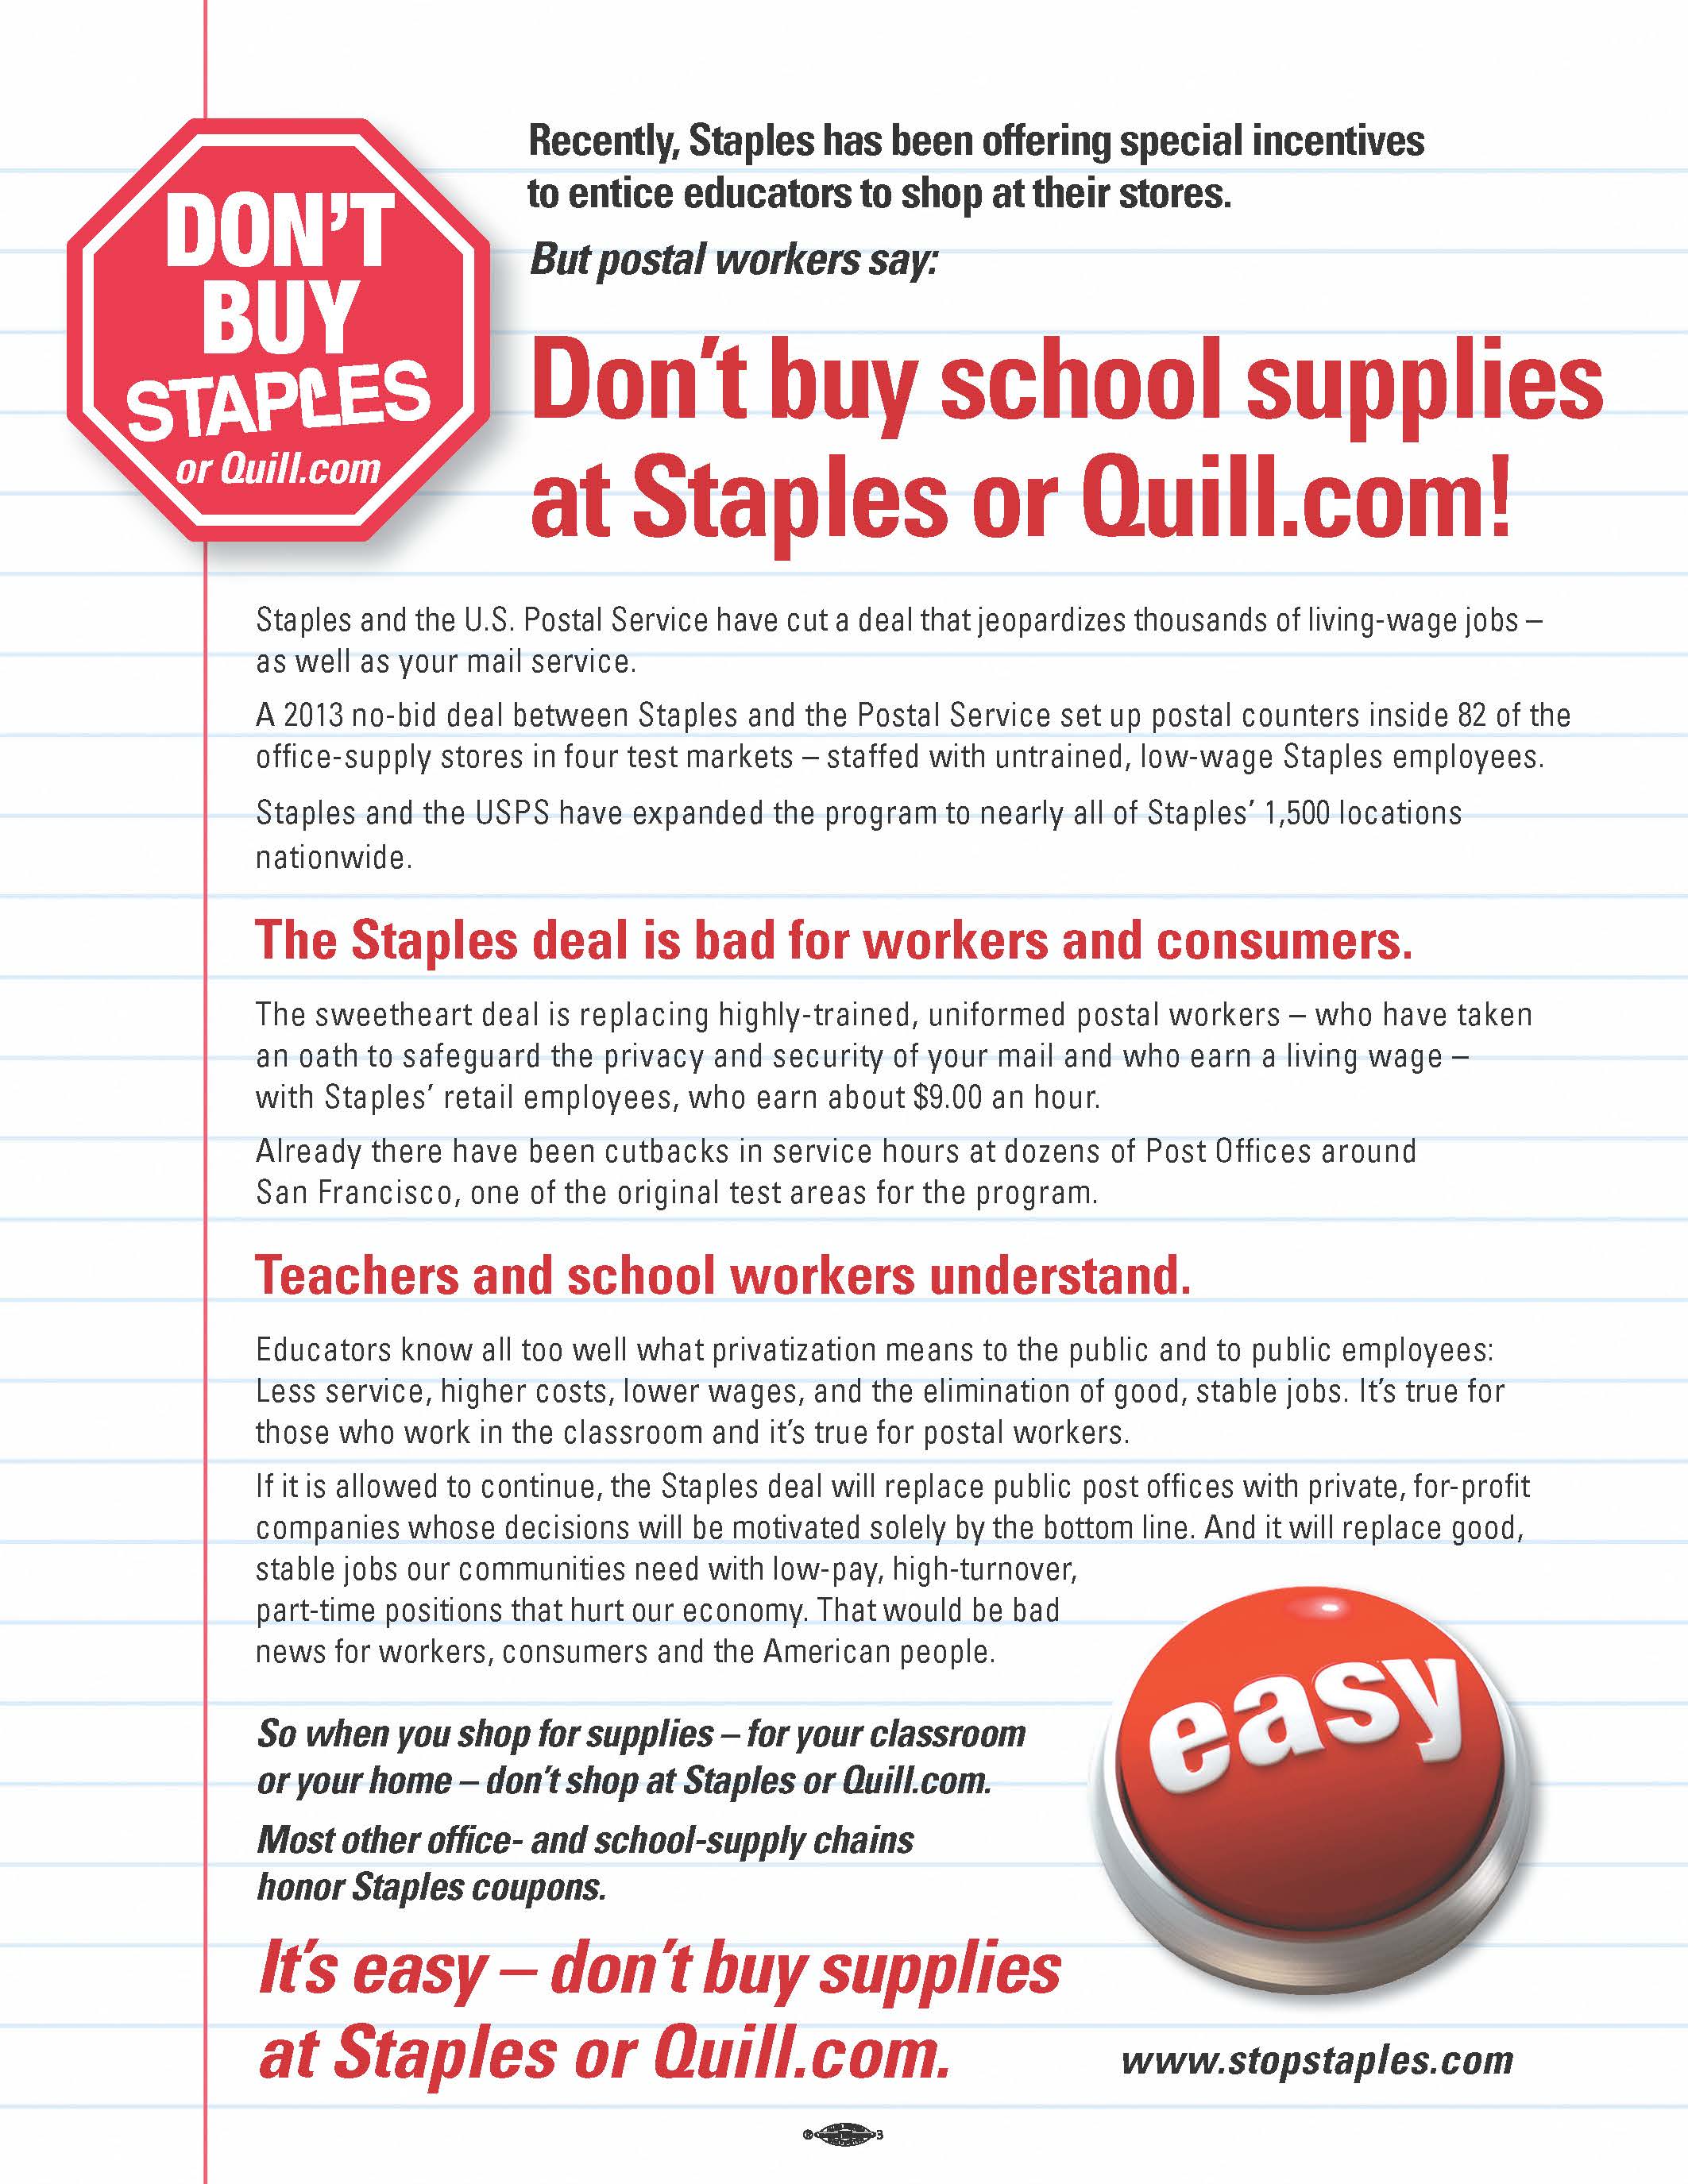 Quill Staples Logo - Staples Protest Materials | APWU